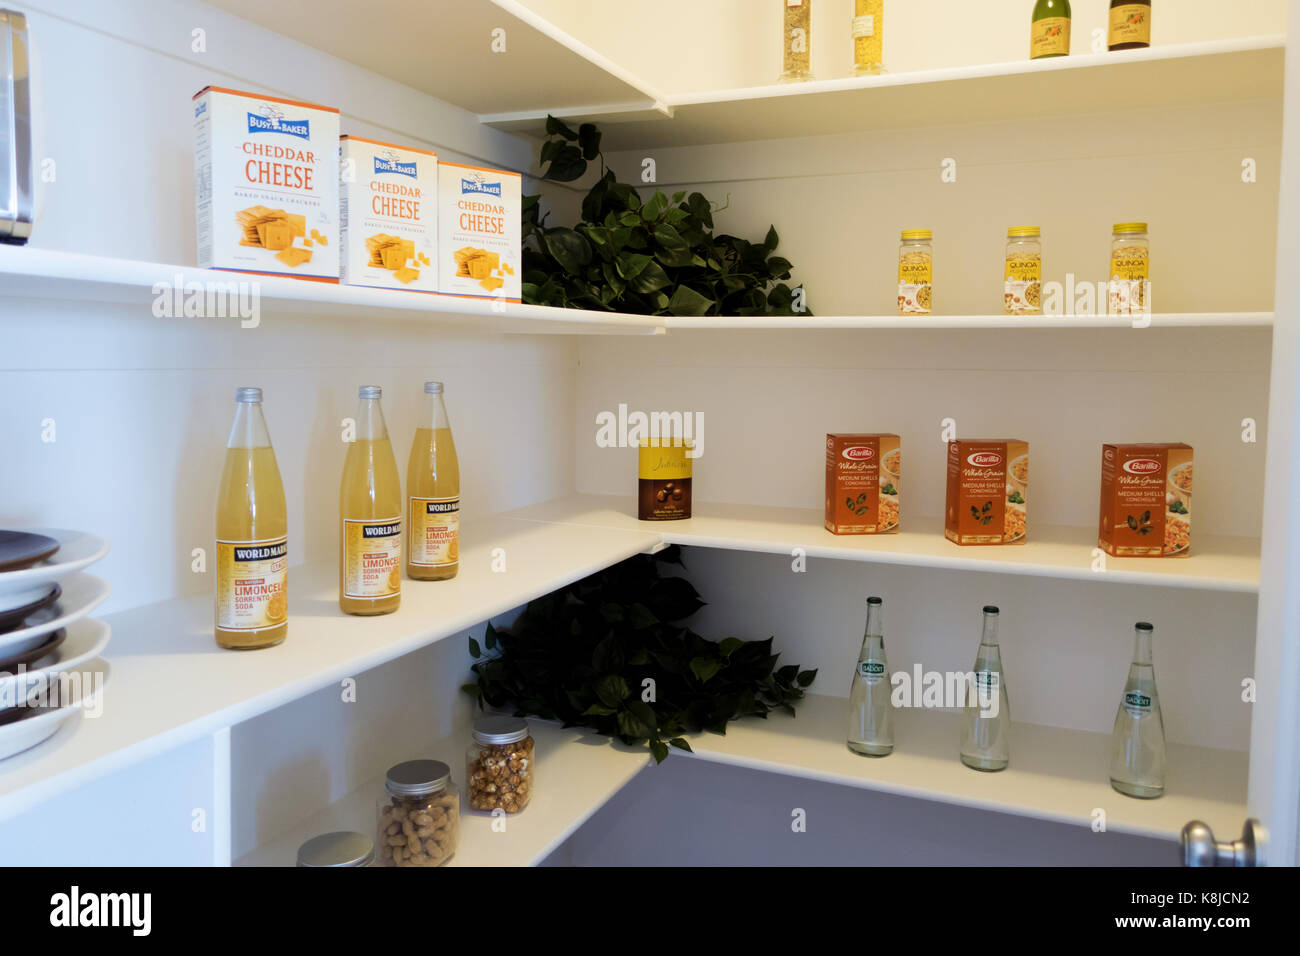 A walk-in kitchen pantry model with jars, wine bottles and boxed food. Stock Photo